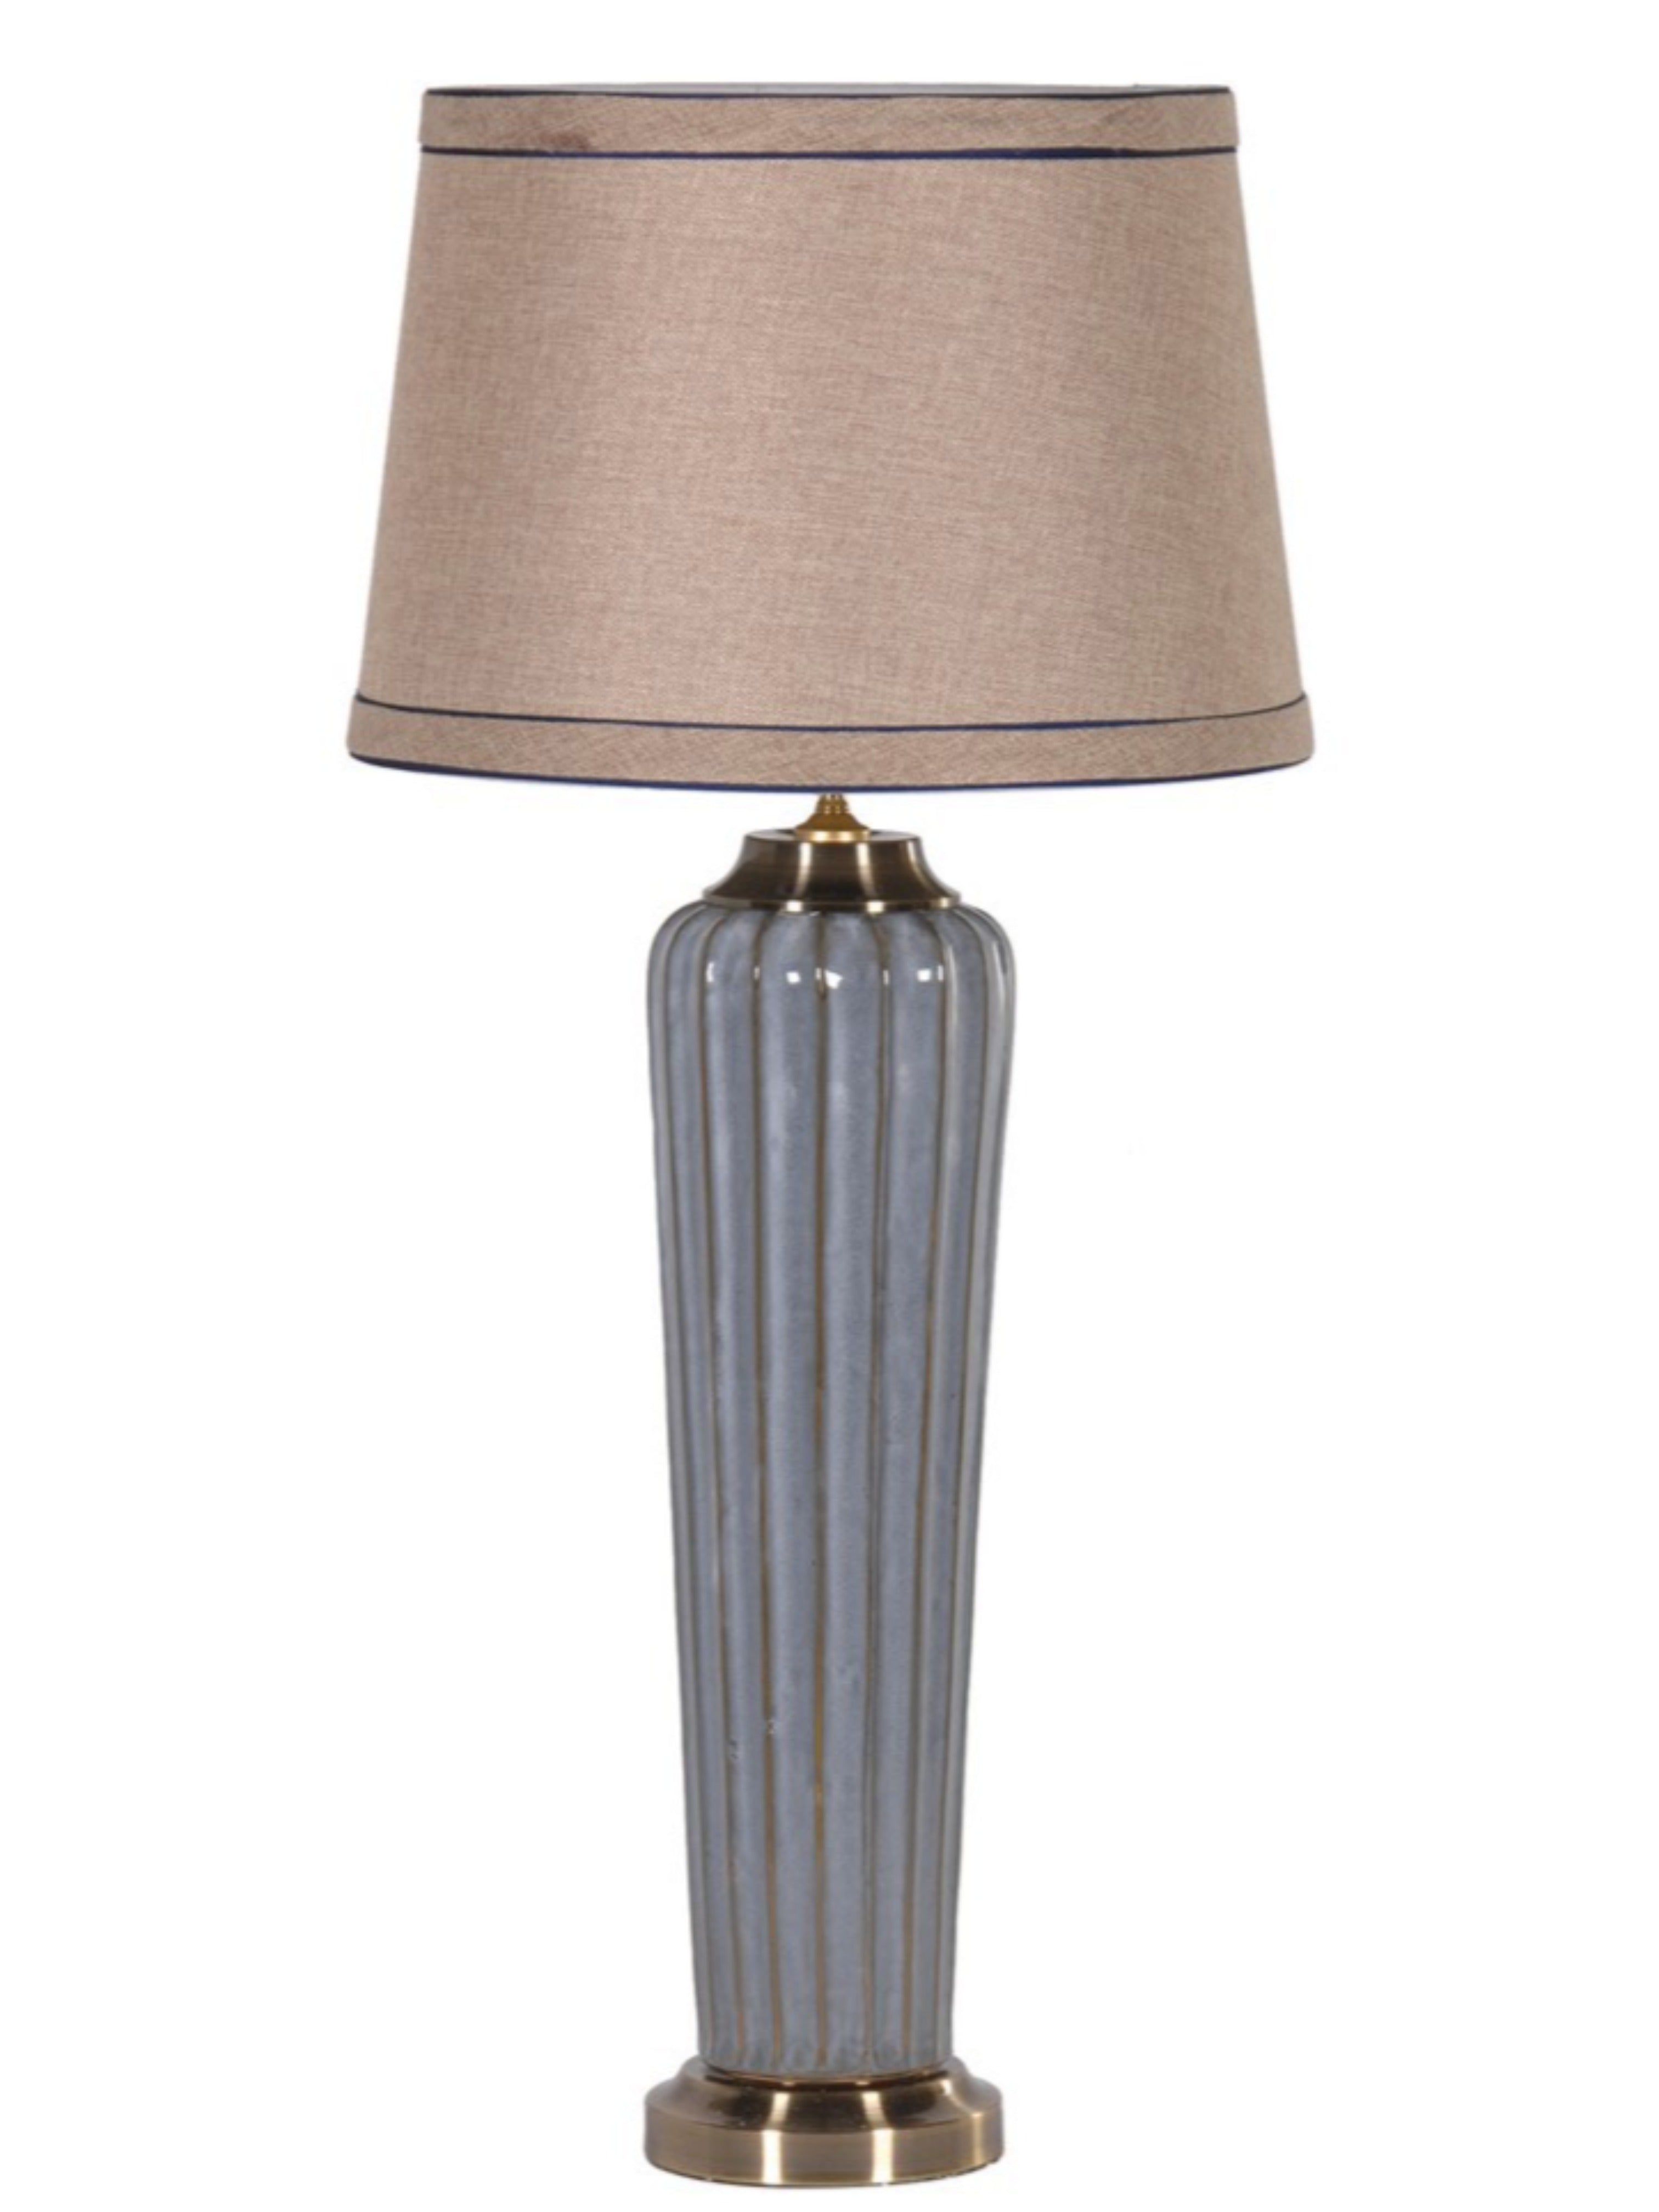 Tall Elegant Blue Porcelain Table Lamp with Polyester Shade